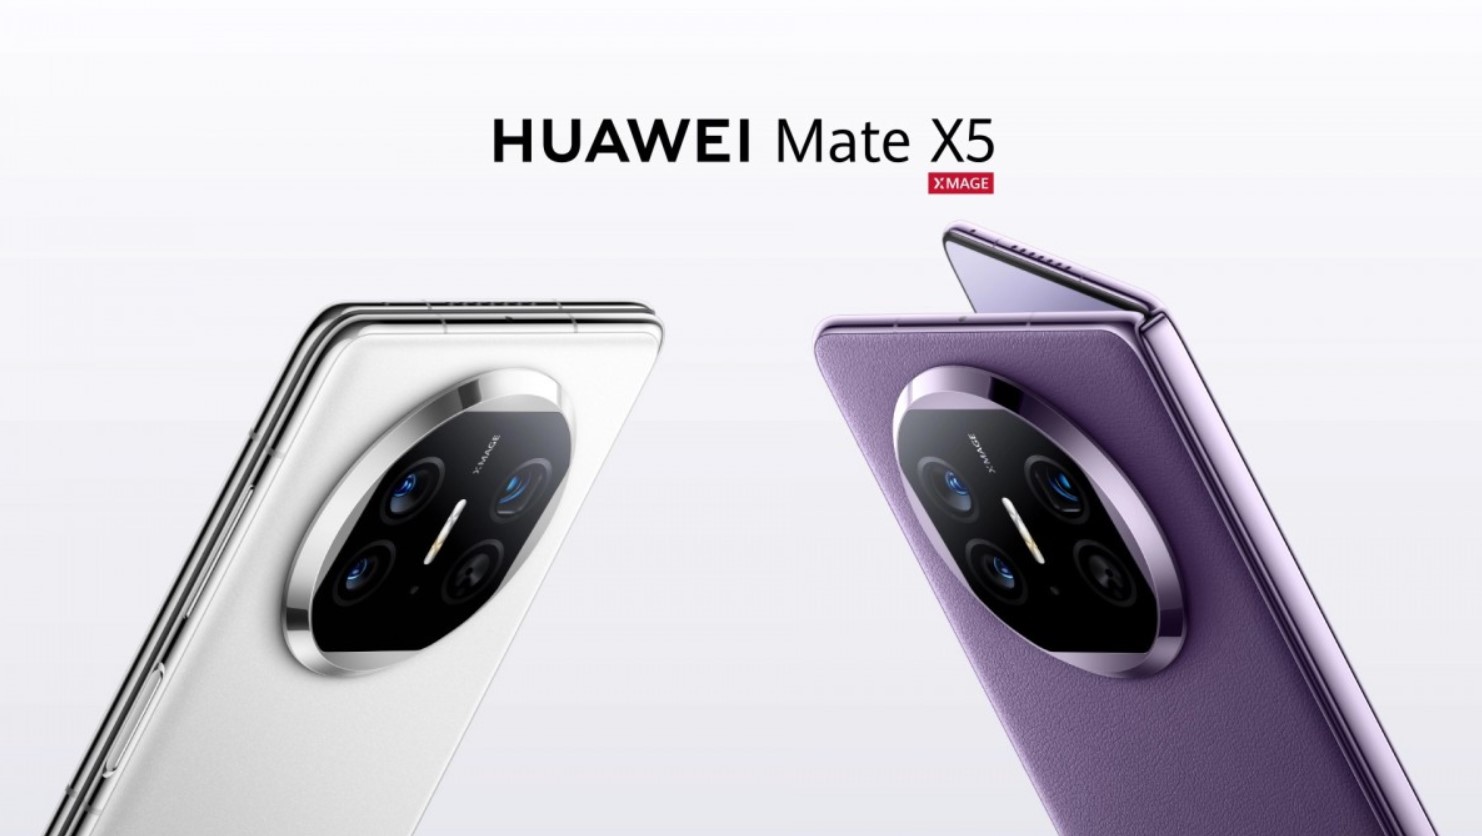 Huawei silently launches Mate X5 smartphone in China; what’s new?